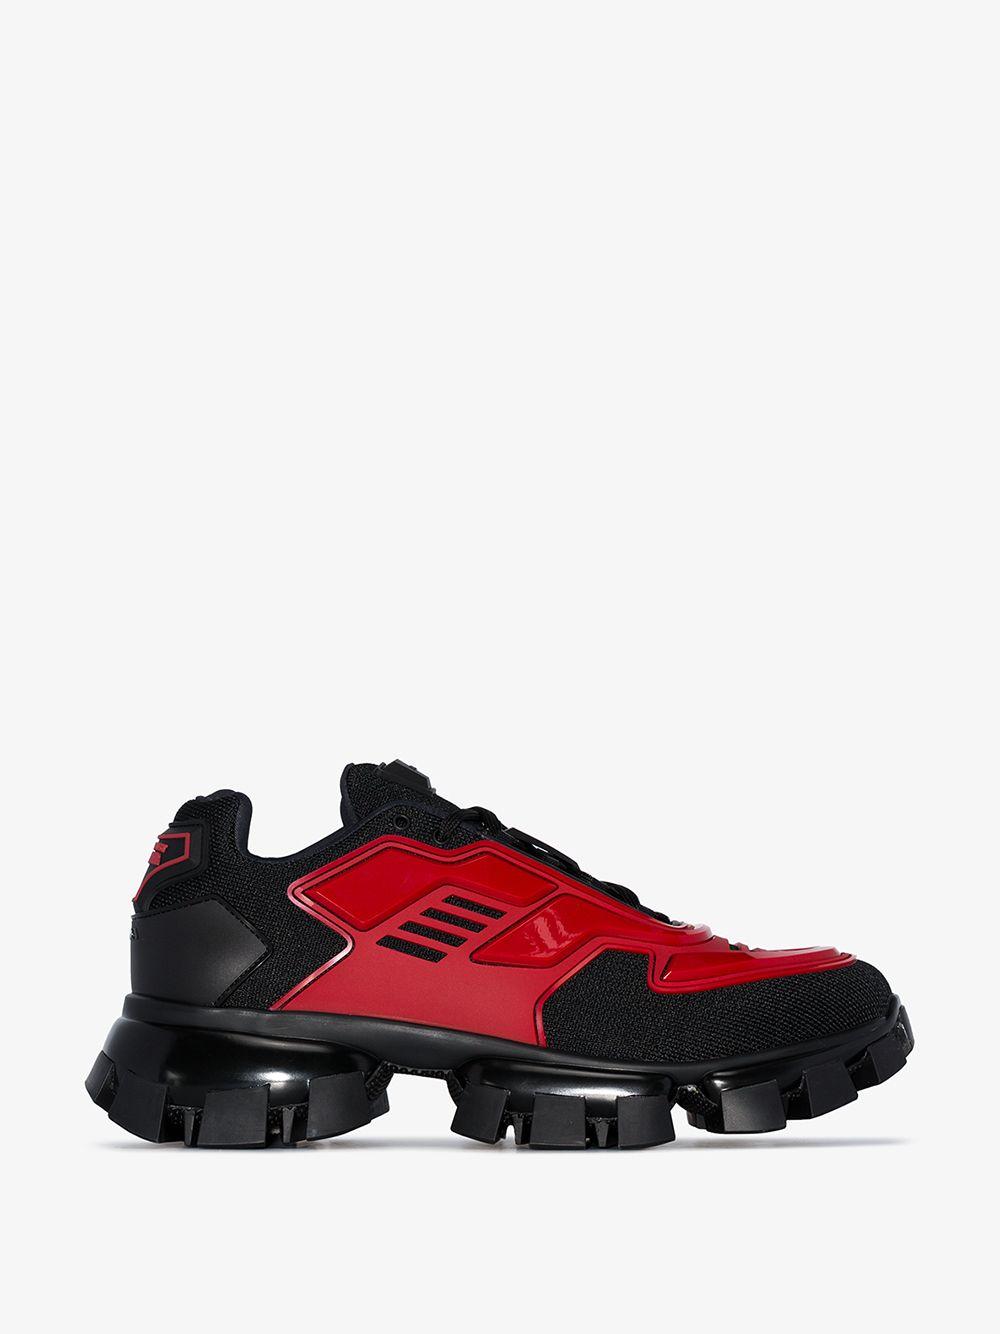 Prada Rubber Black And Red Cloudbust Thunder Sneakers for Men | Lyst